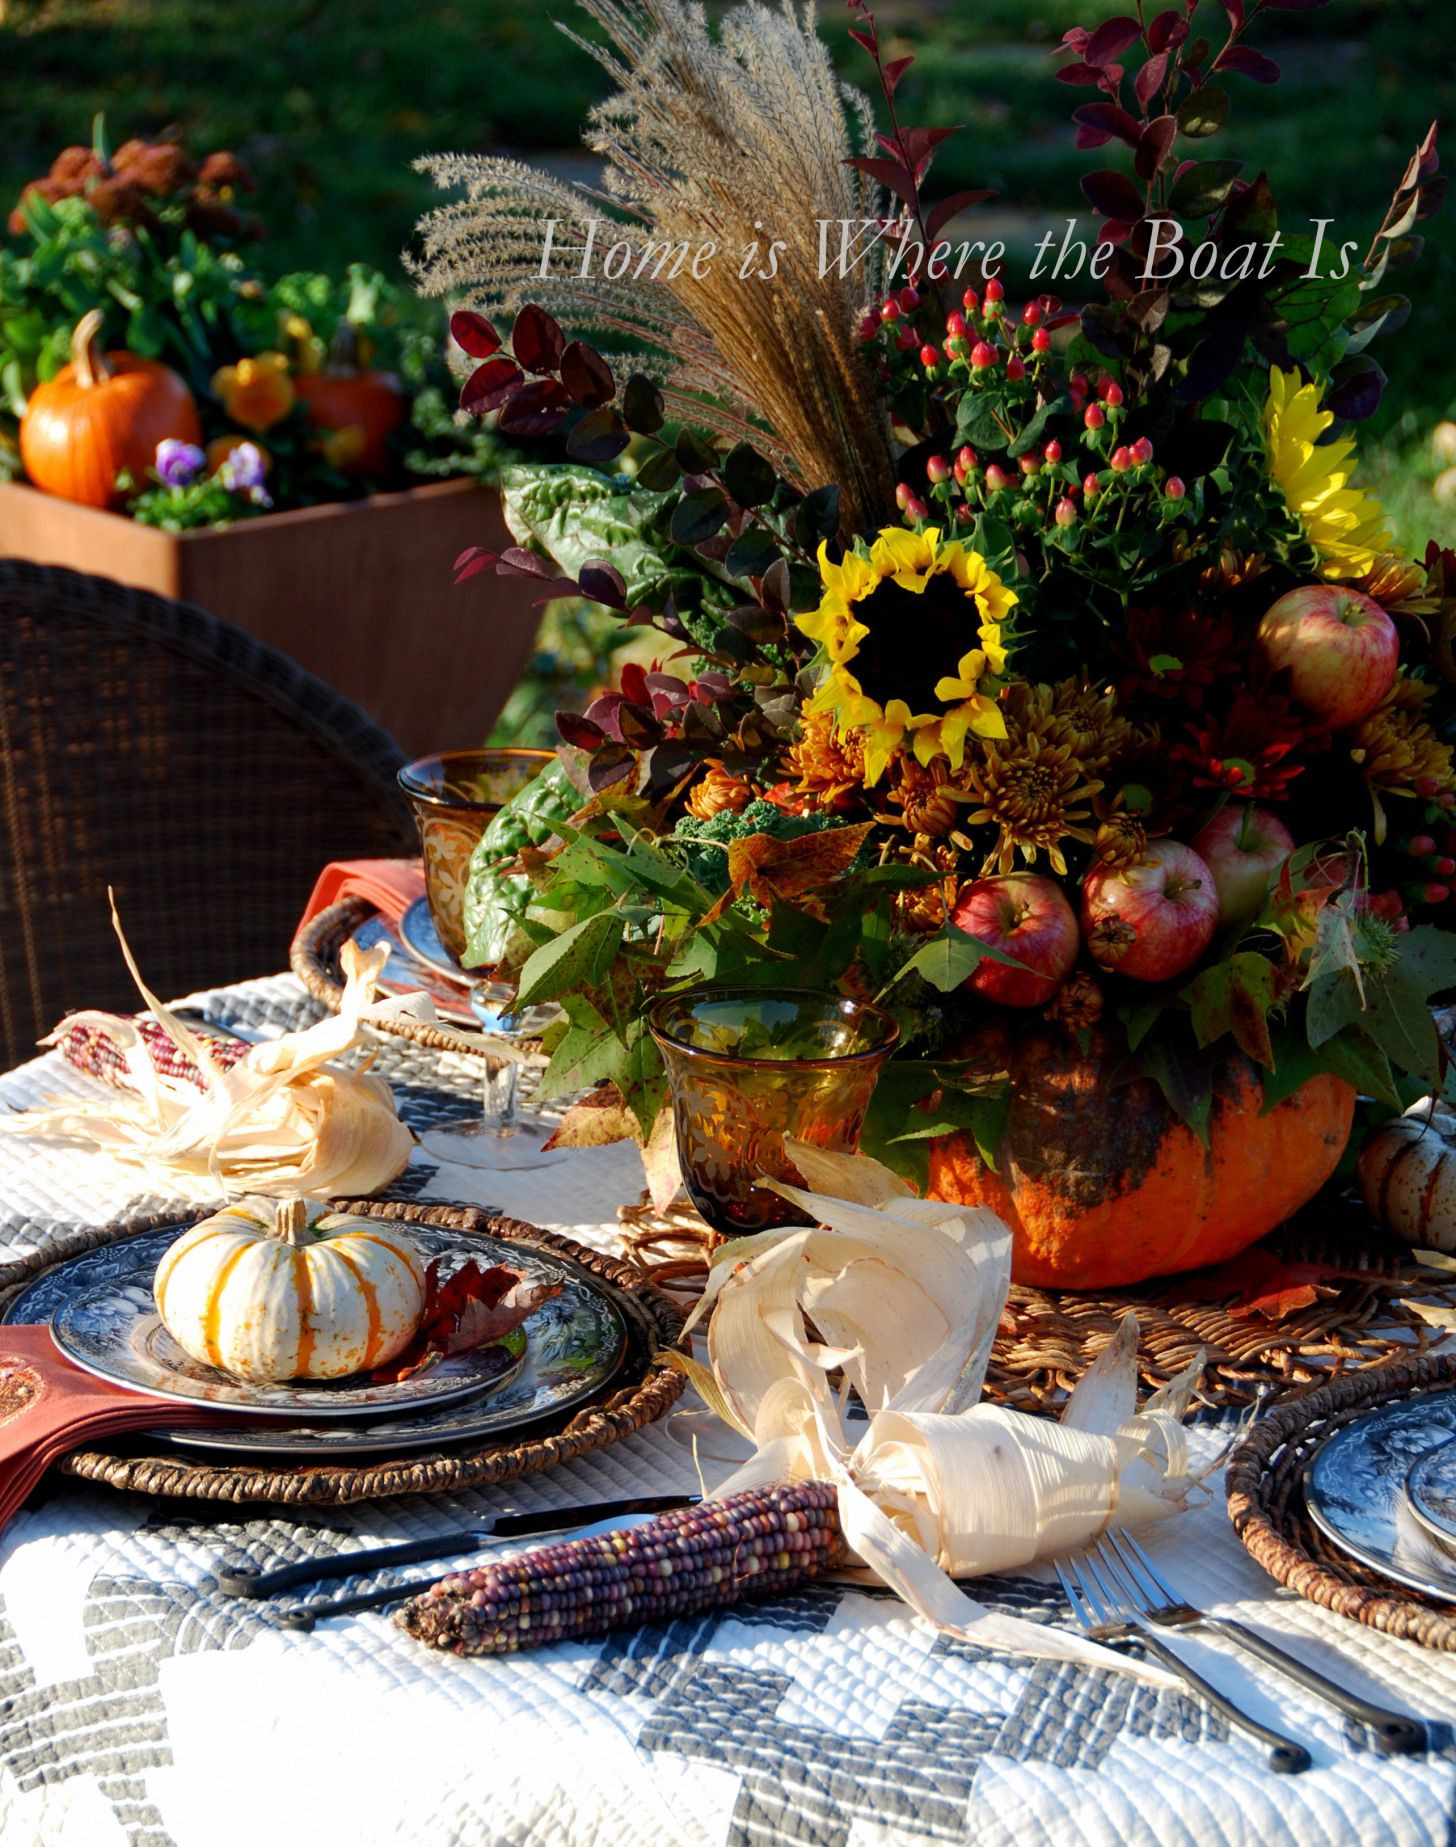 27 Stylish Pumpkins as Vases for Centerpieces 2024 free download pumpkins as vases for centerpieces of pumpkin vase centerpiece and fall table homeiswheretheboatis net within pumpkin vase centerpiece and fall table homeiswheretheboatis net